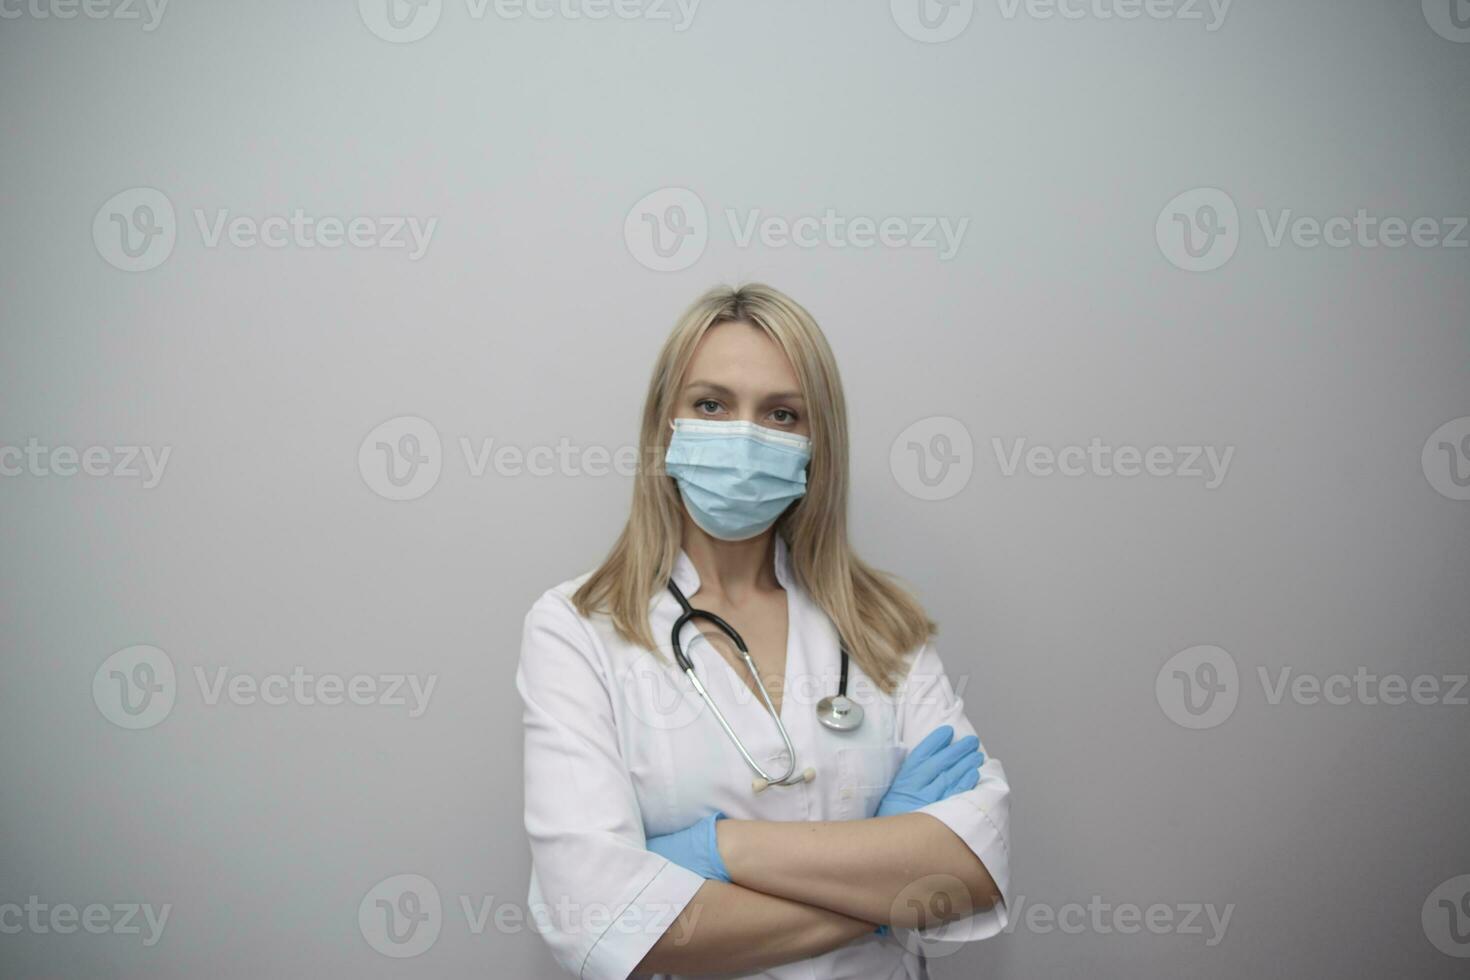 Covid19, coronavirus, healthcare and doctors concept. Portrait of professional confident young asian doctor in medical mask and white coat, stethoscope over neck, ready help patient, fight disease. photo